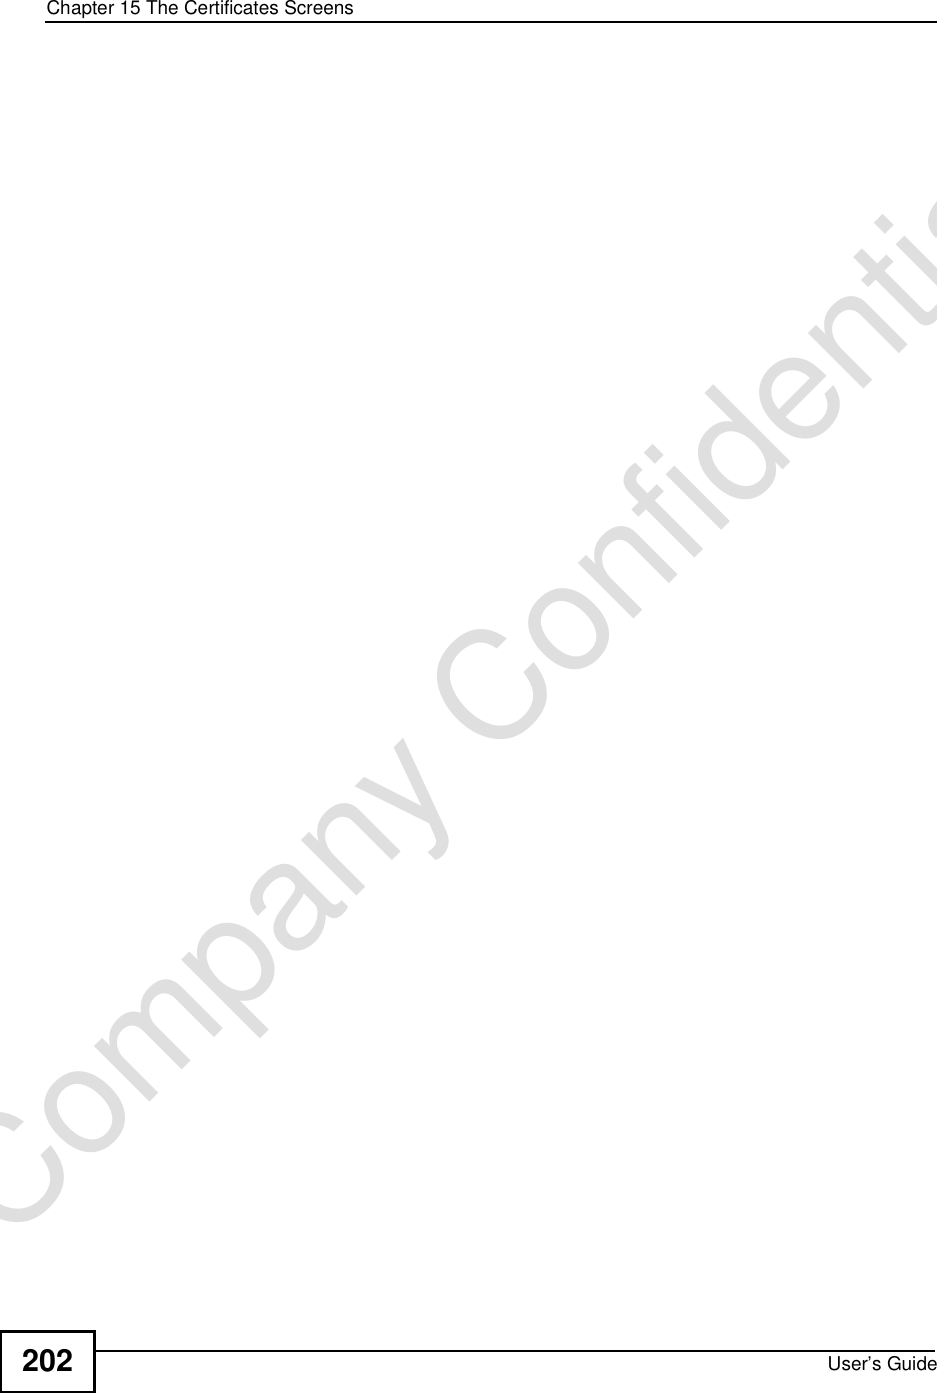 Chapter 15The Certificates ScreensUser’s Guide202Company Confidential